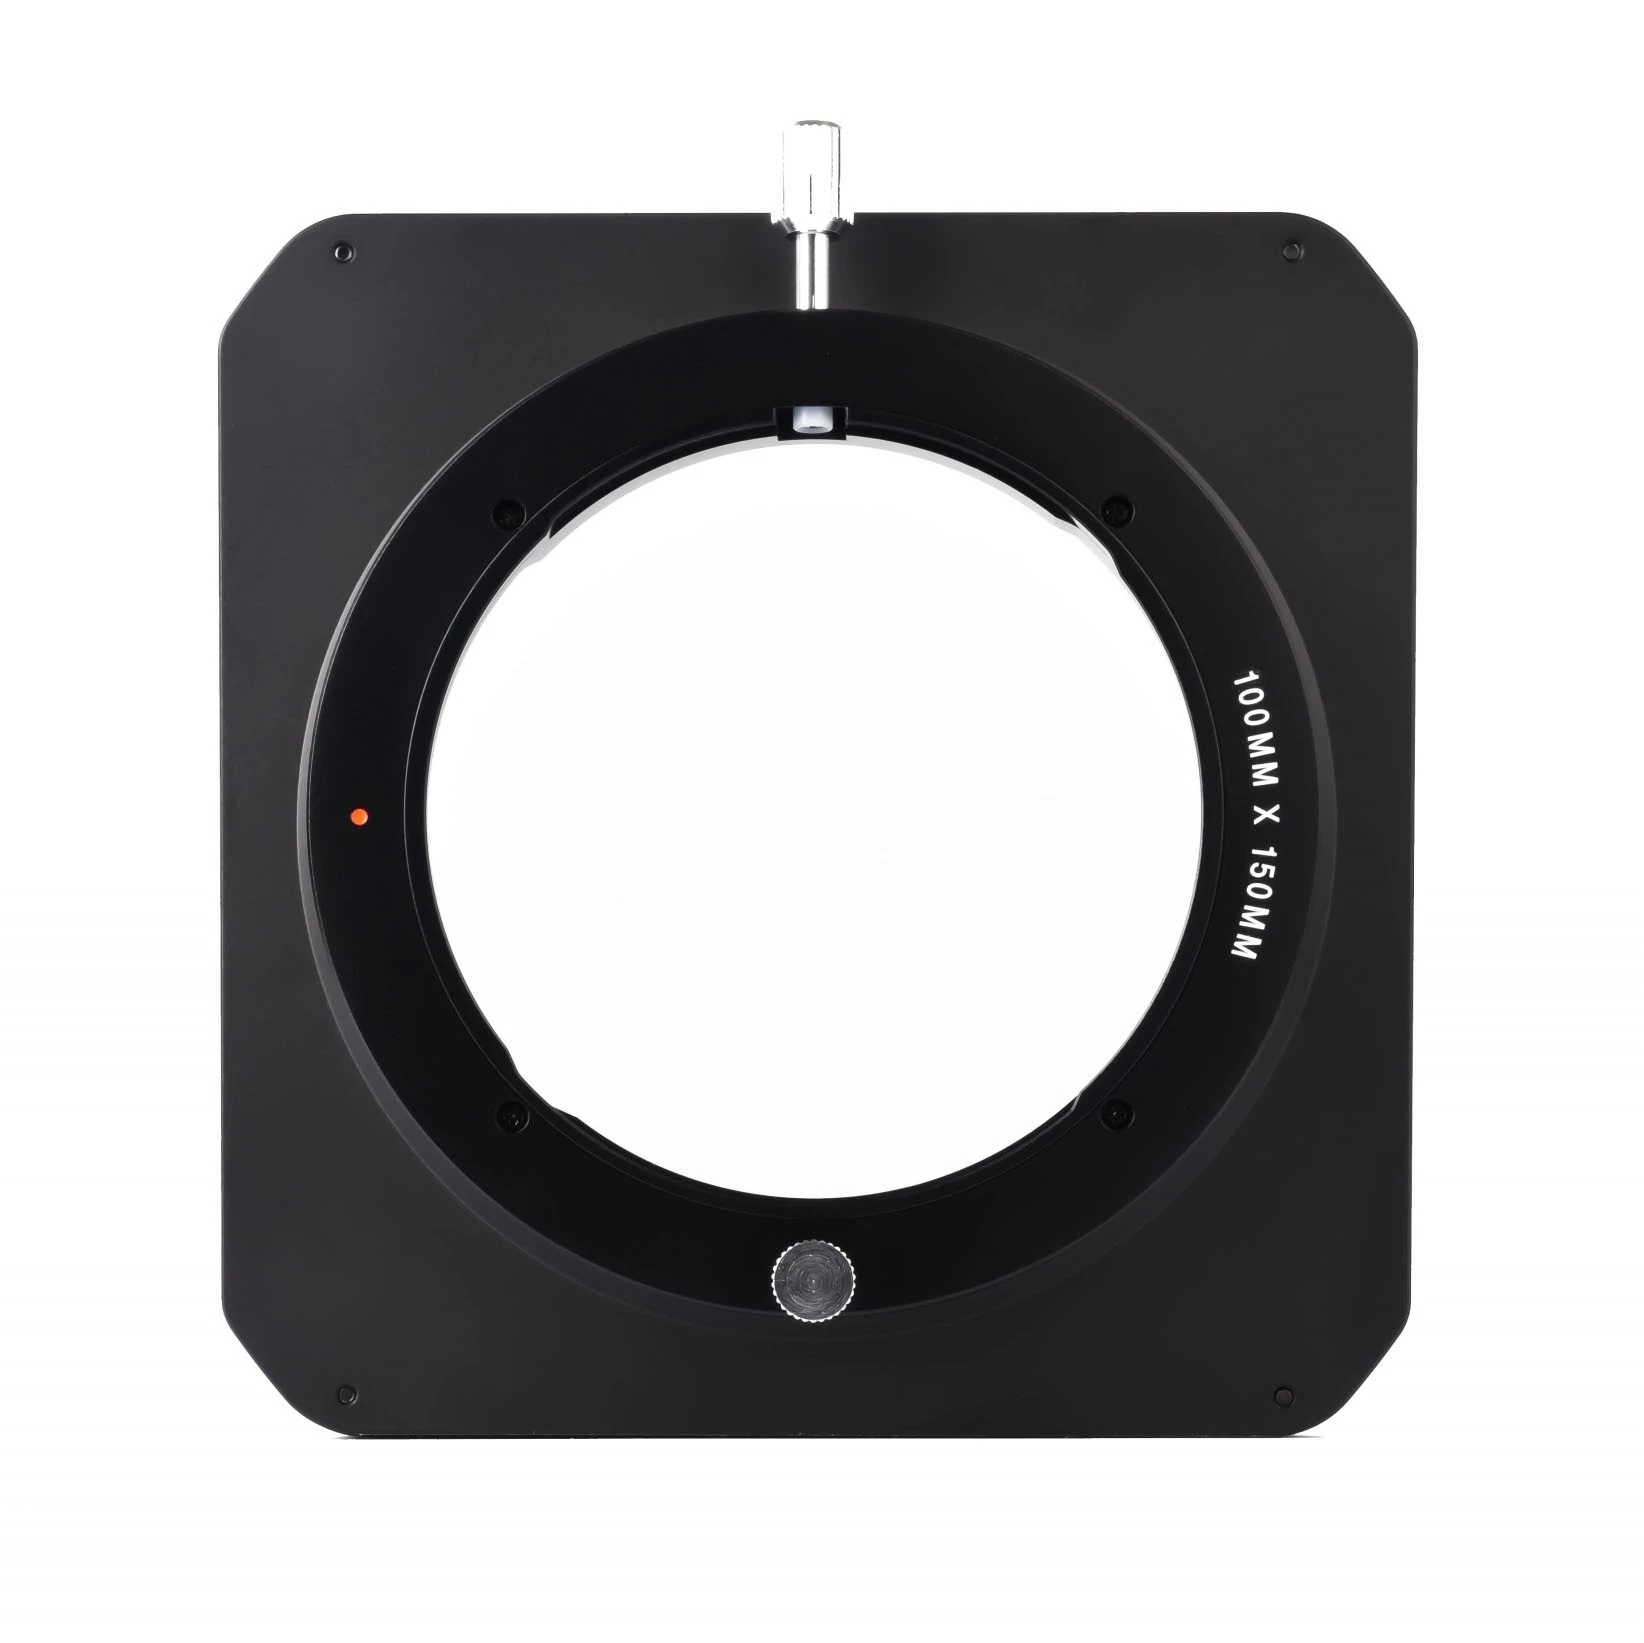 Laowa 100mm Filter Holder System (Lite) for 12mm f2.8